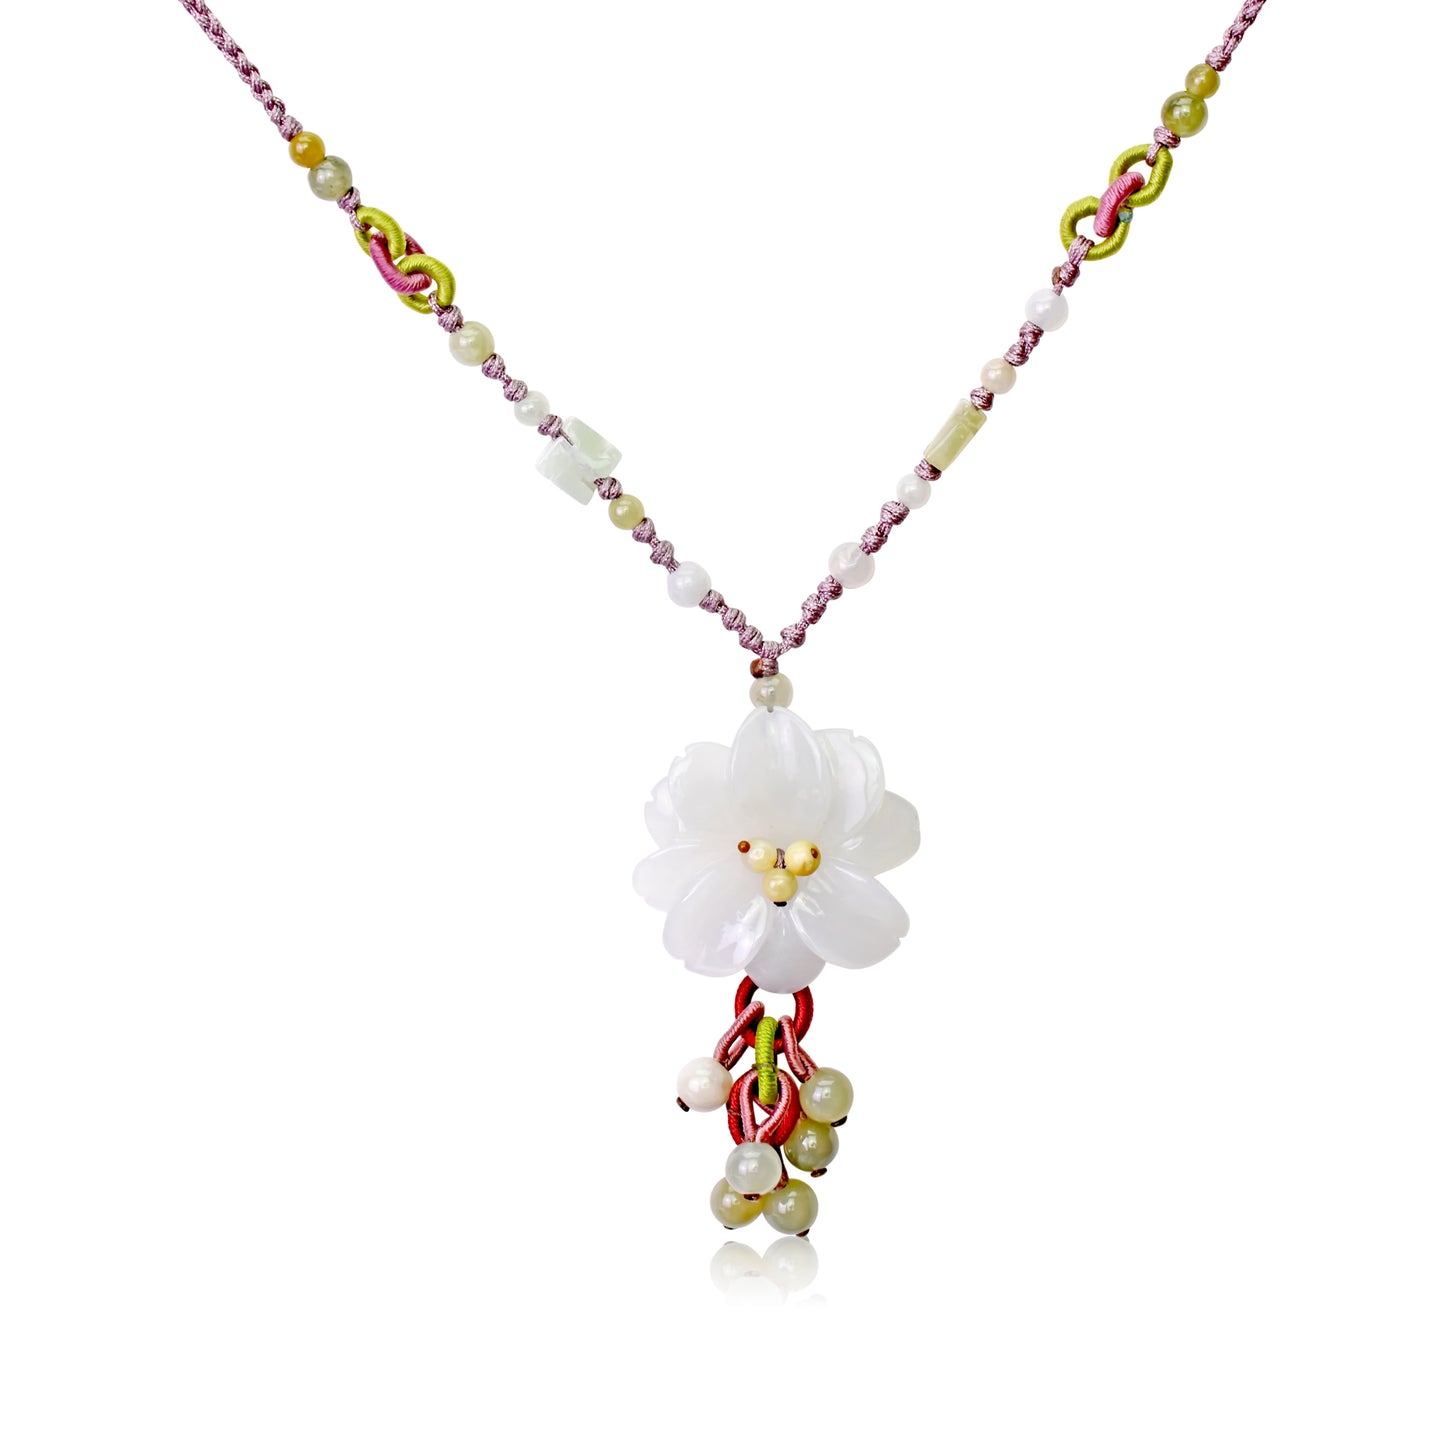 Feel the Warmth of Hope with an Apply Blossom Necklace